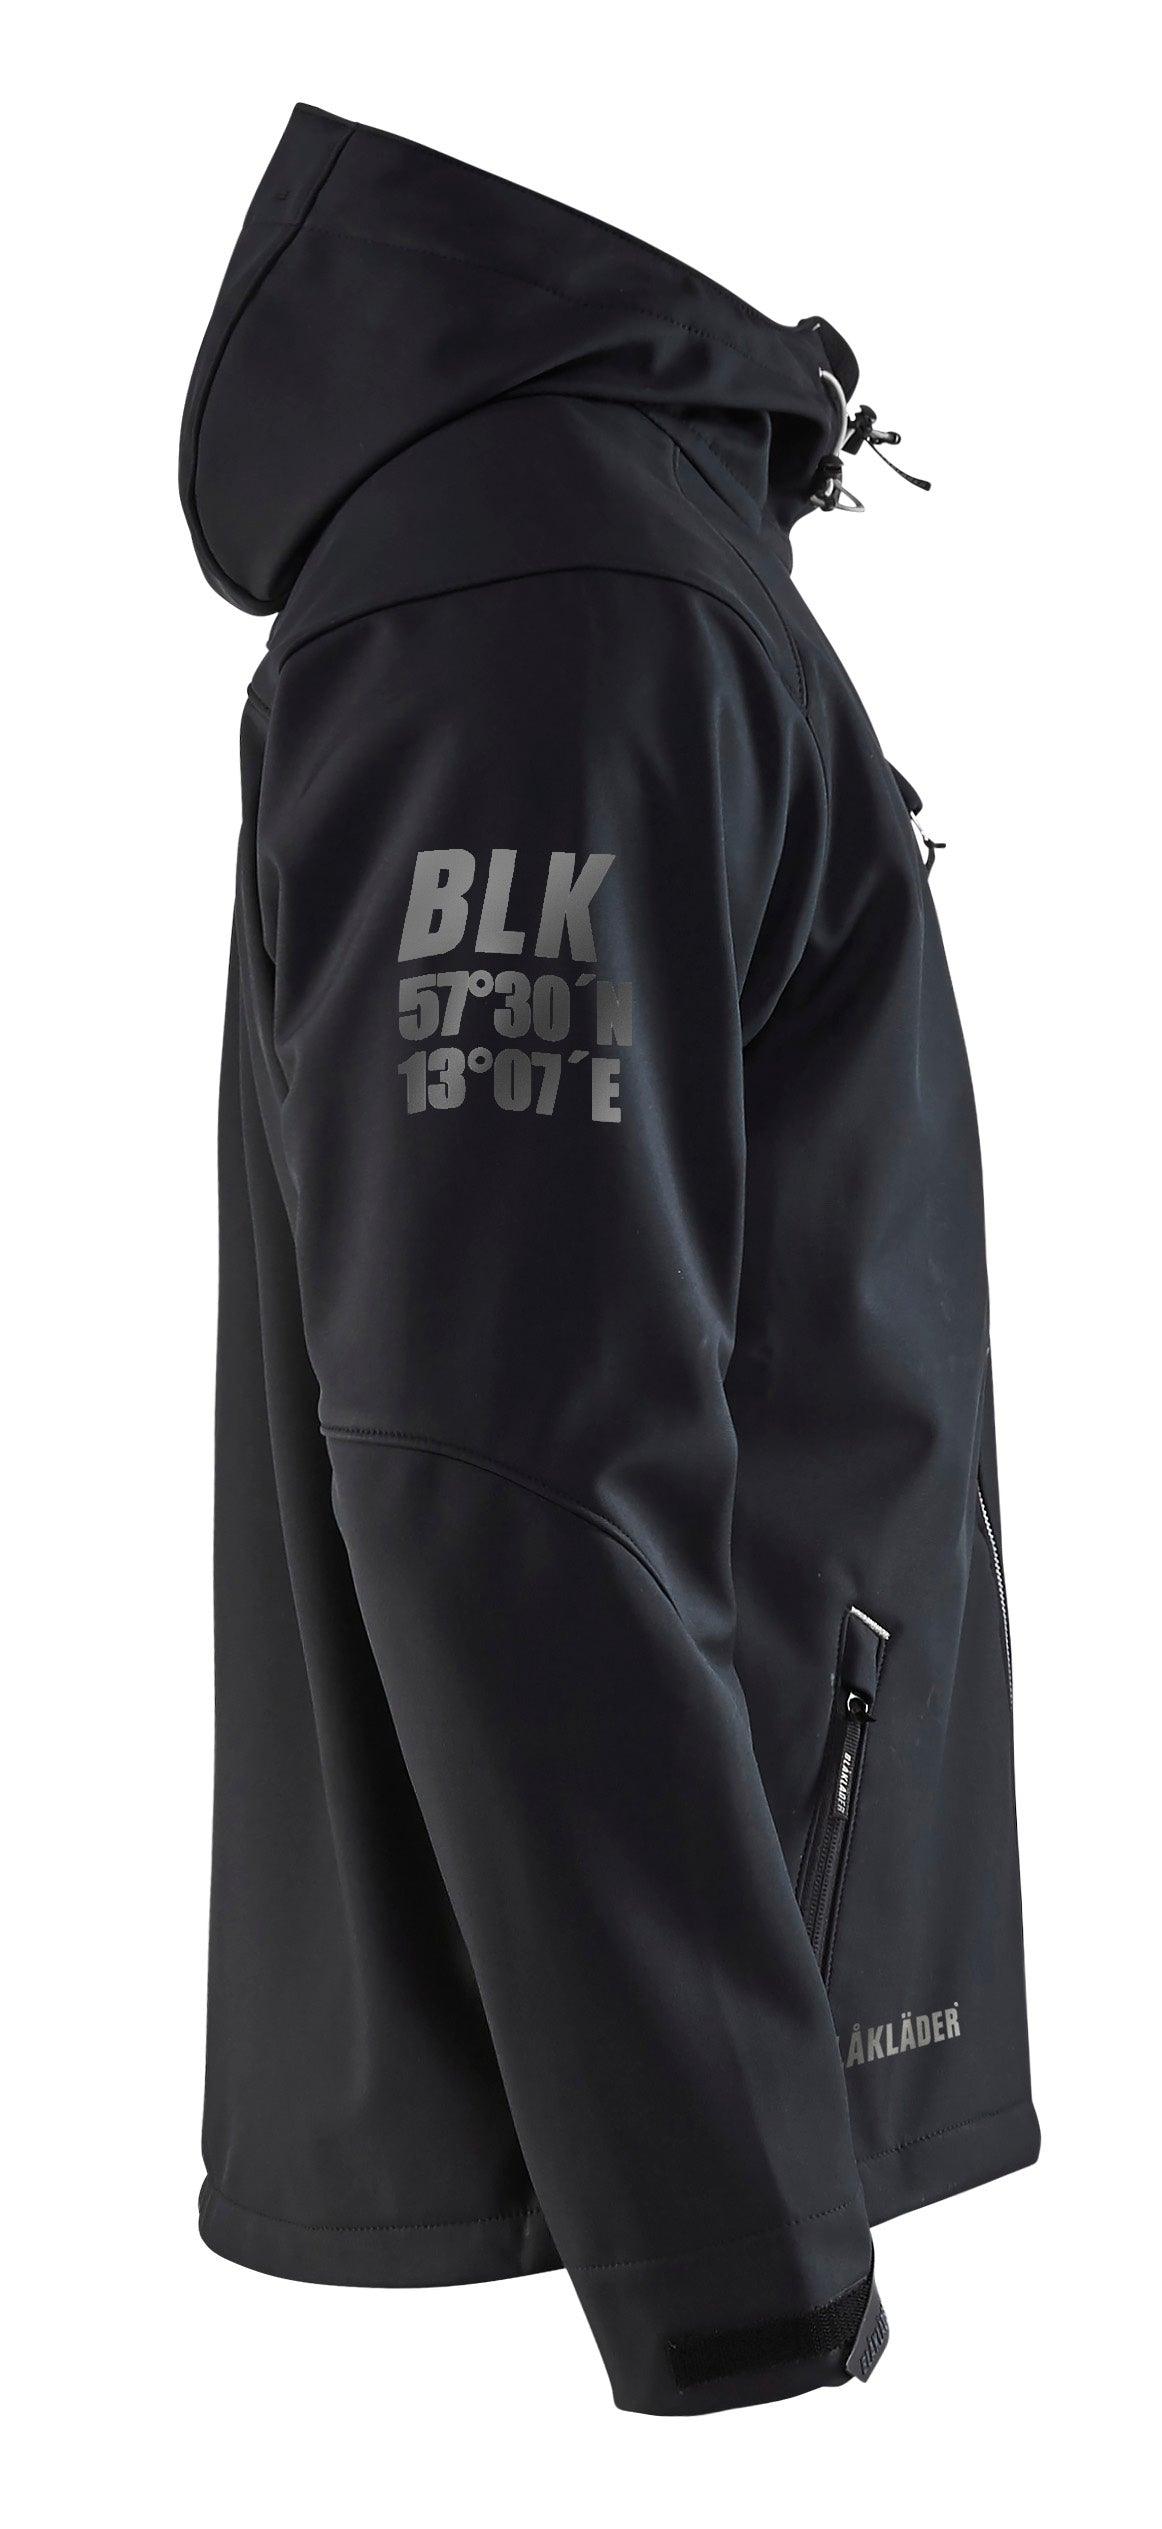 Blaklader 4939 Hooded Water-Resistant Pro Softshell - Black/Silver - Trusted Gear Company LLC